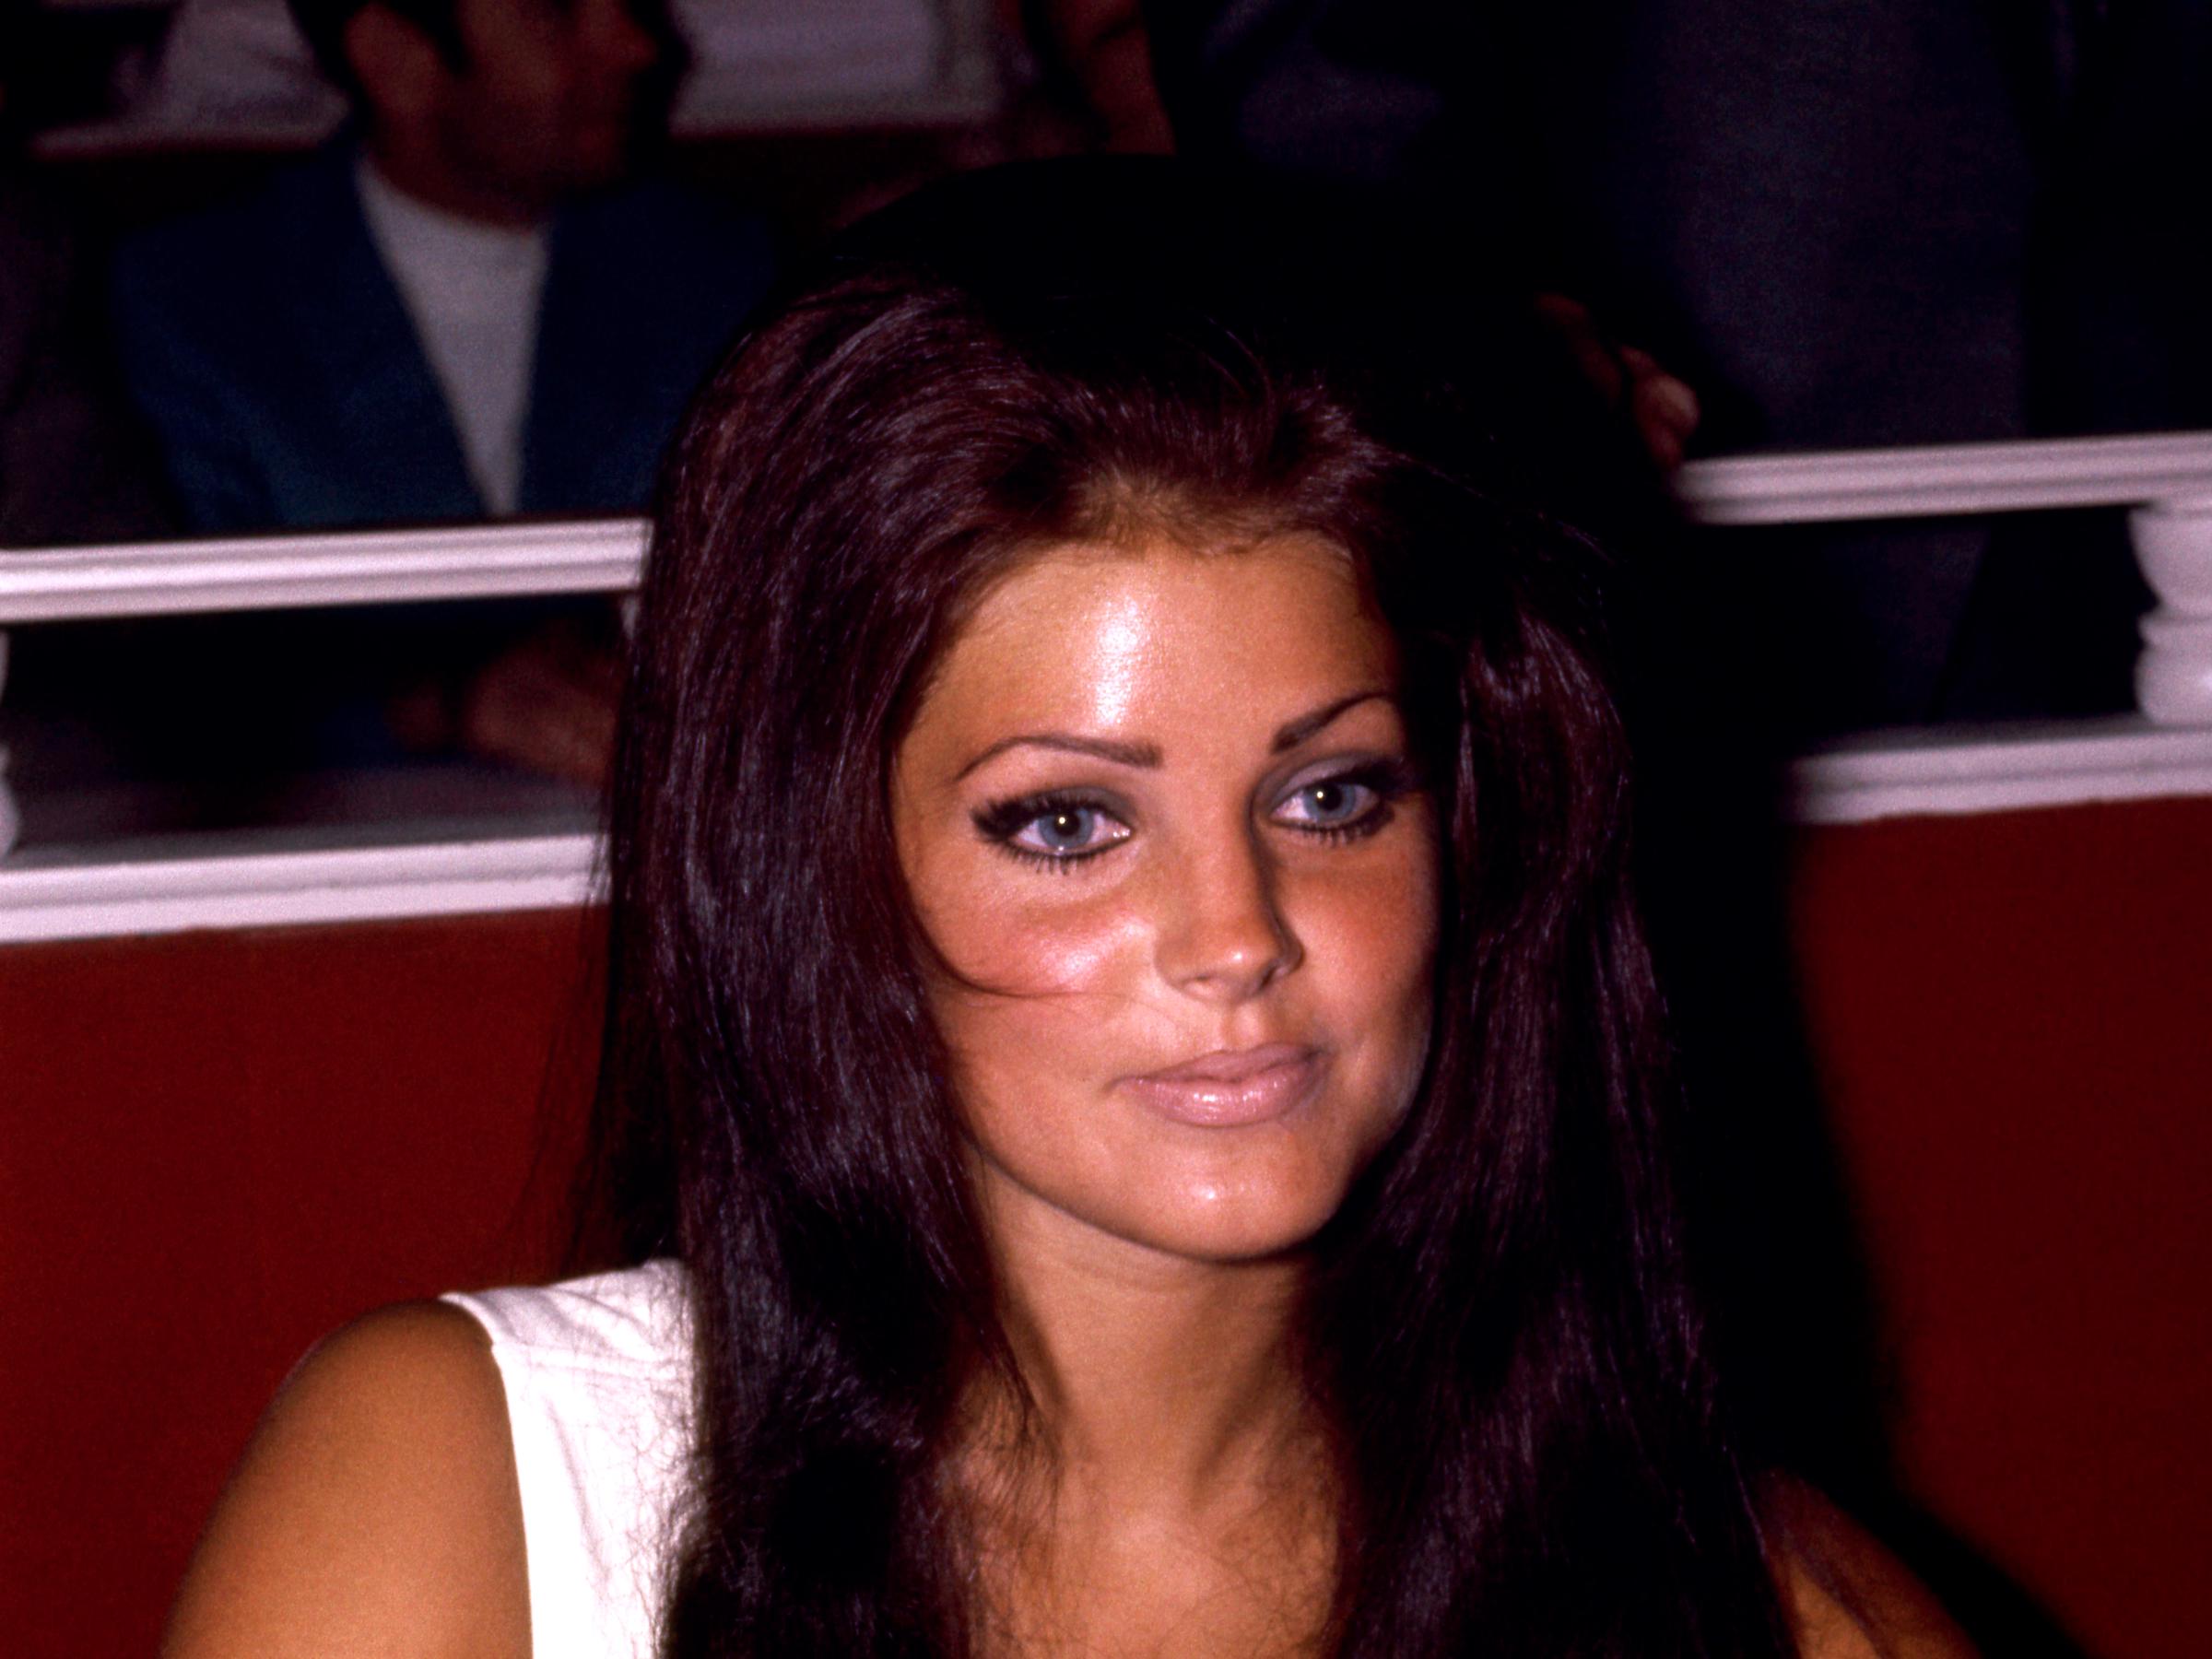 Priscilla Presley sits during her husband Elvis Presley's opening act at the International Hotel in August 1969, in Las Vegas, Nevada. | Source: Getty Images